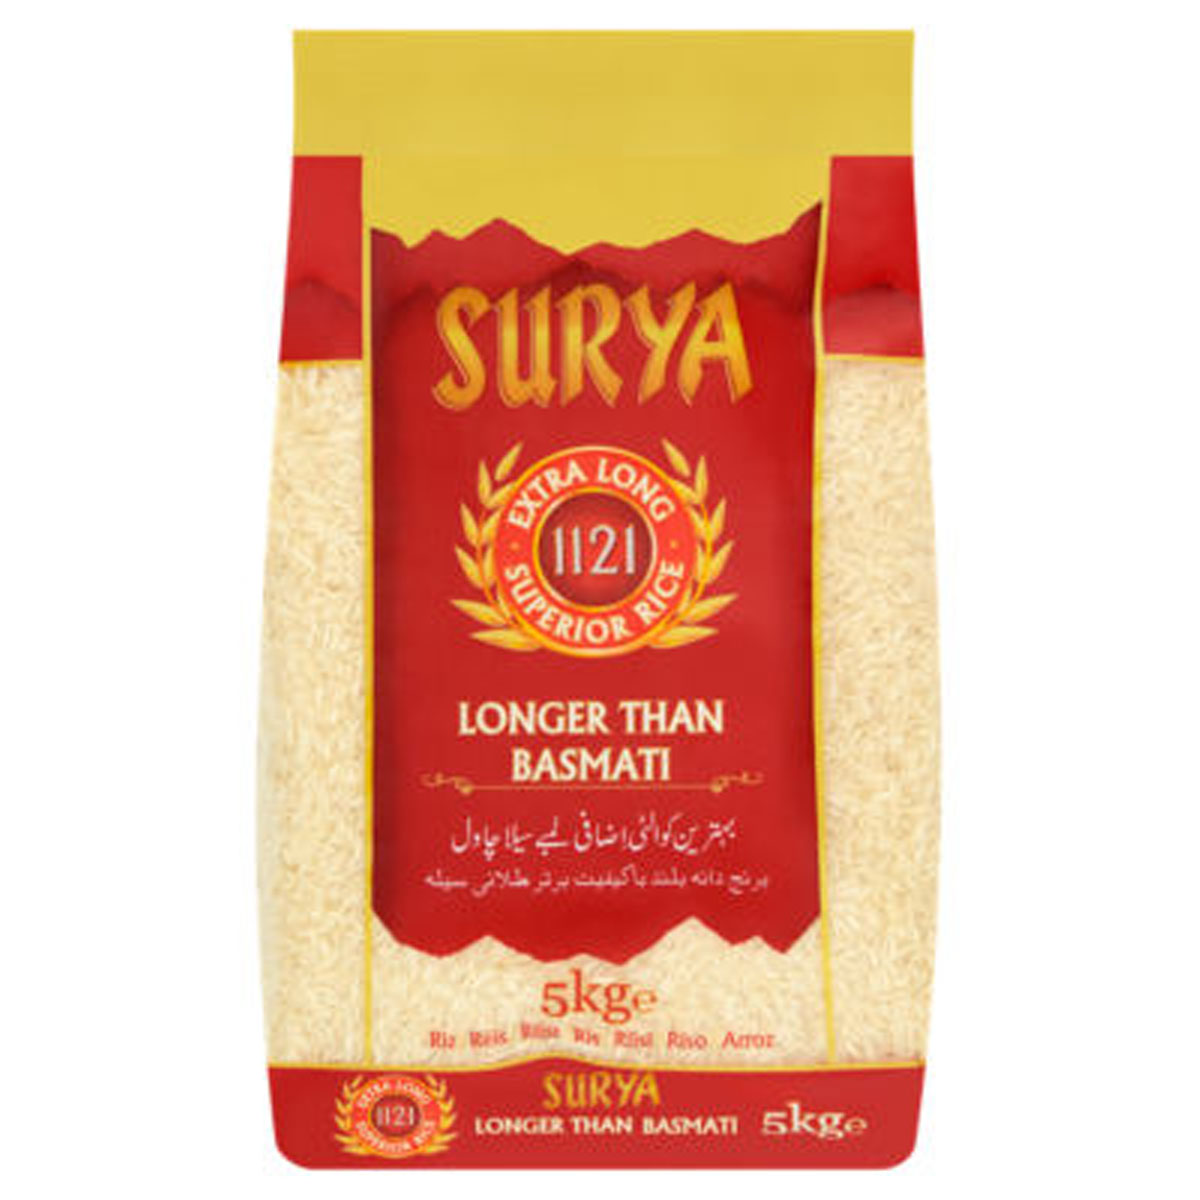 Surya - Extra Long Superior Rice - 5kg - Continental Food Store